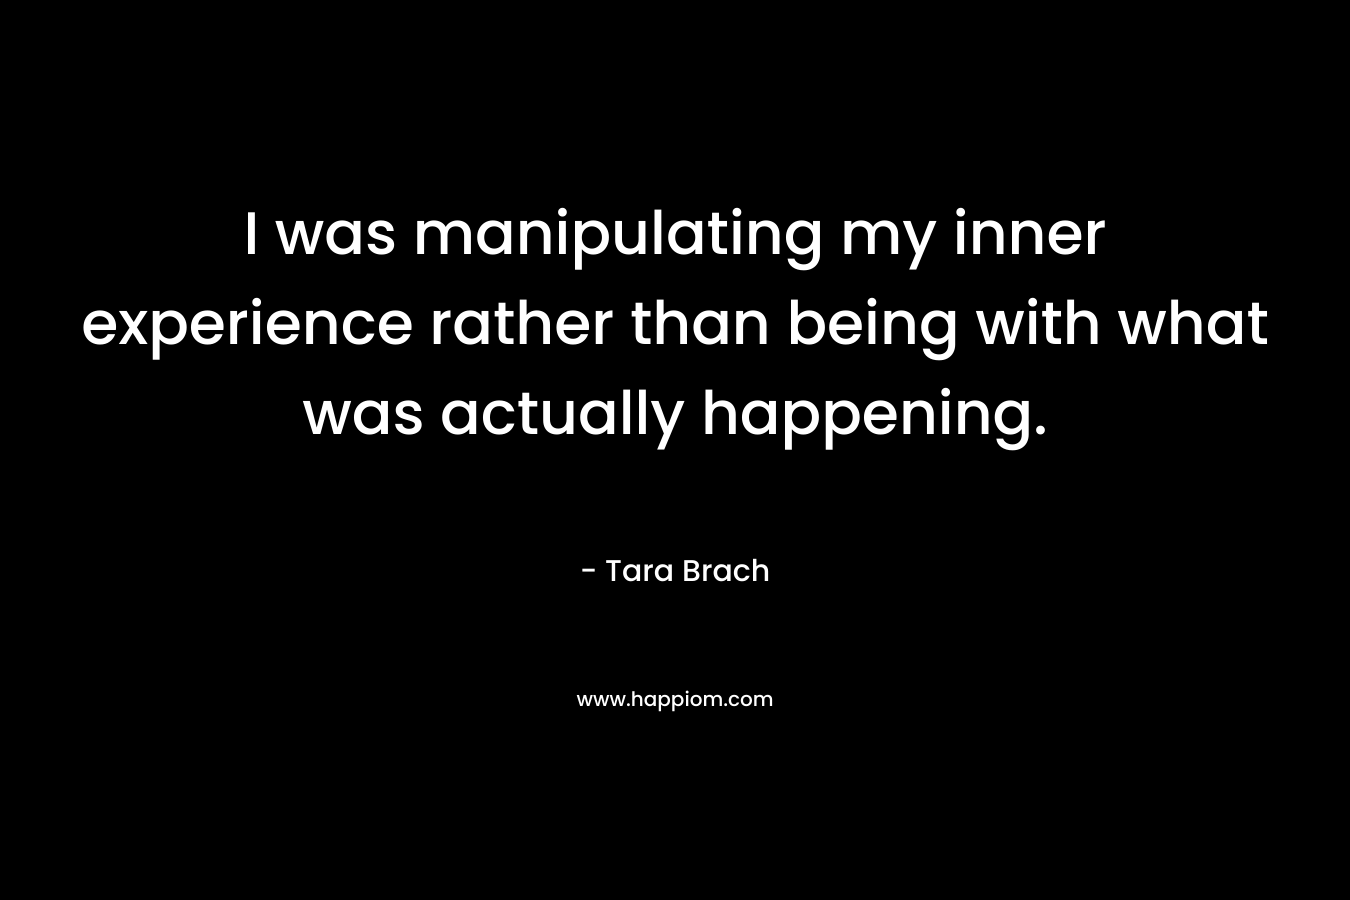 I was manipulating my inner experience rather than being with what was actually happening.